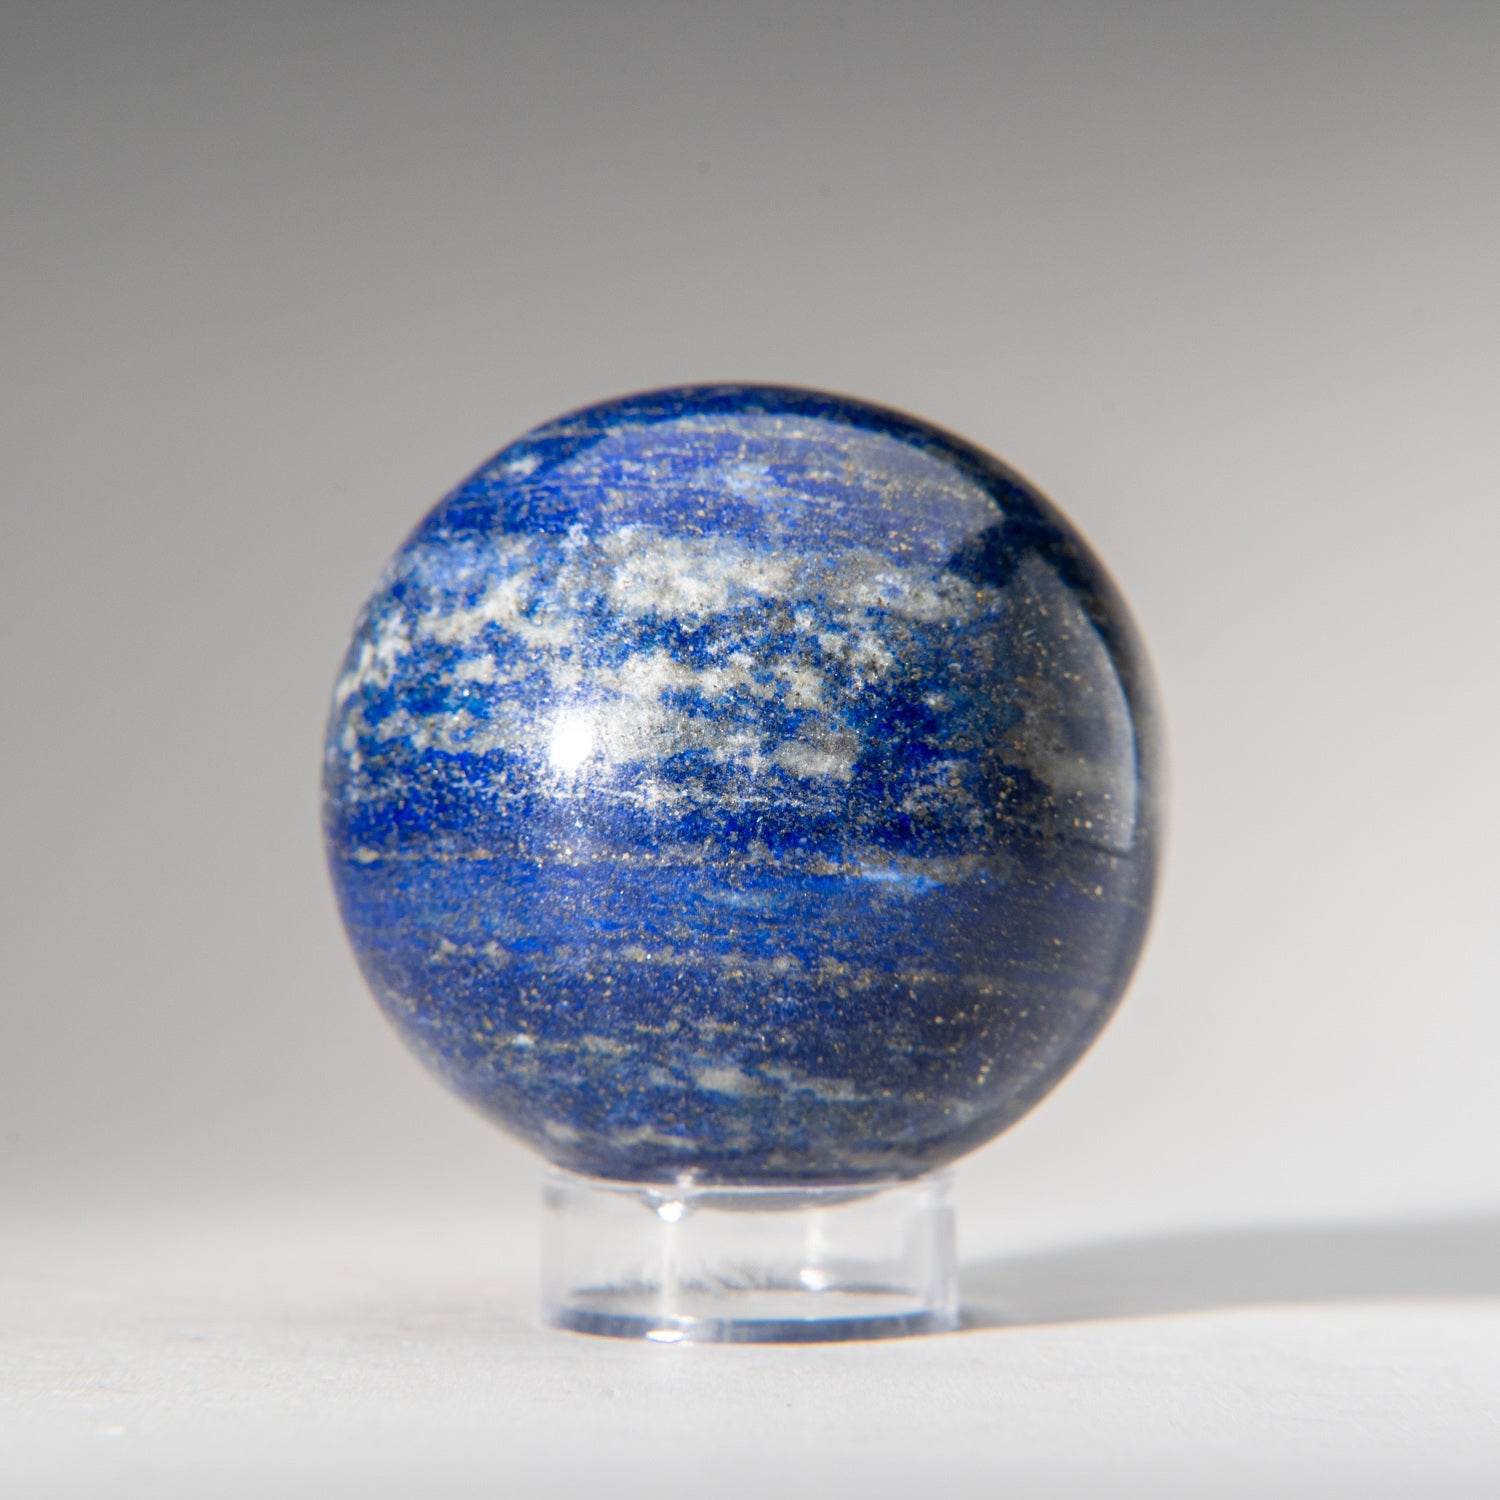 Genuine Polished Lapis Lazuli (2.75") Sphere from Afghanistan